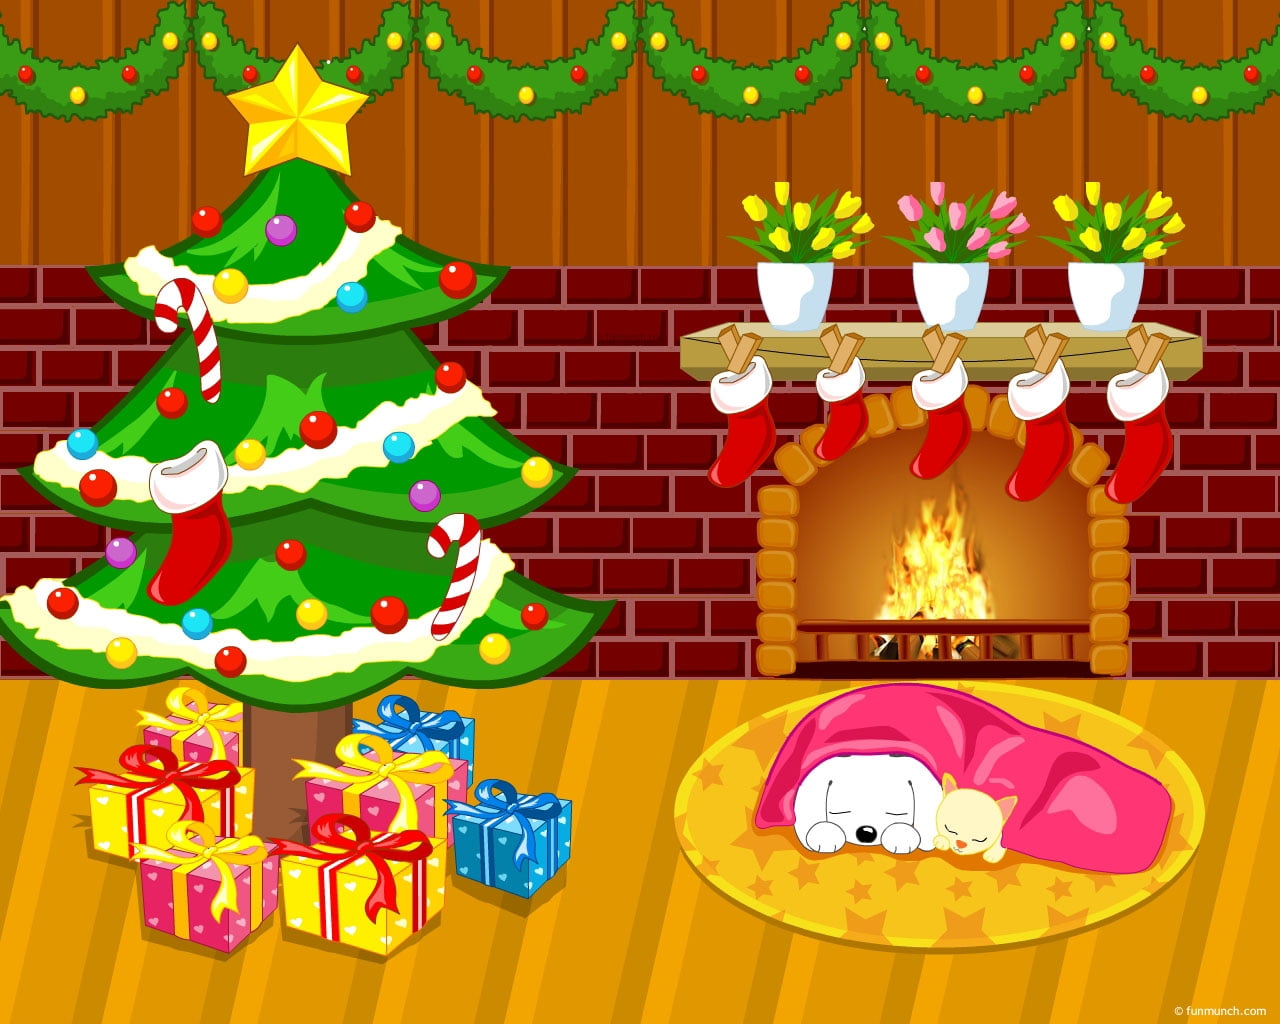 puppy and kitten sleeping on rug near fireplace and Christmas tree themed sticker